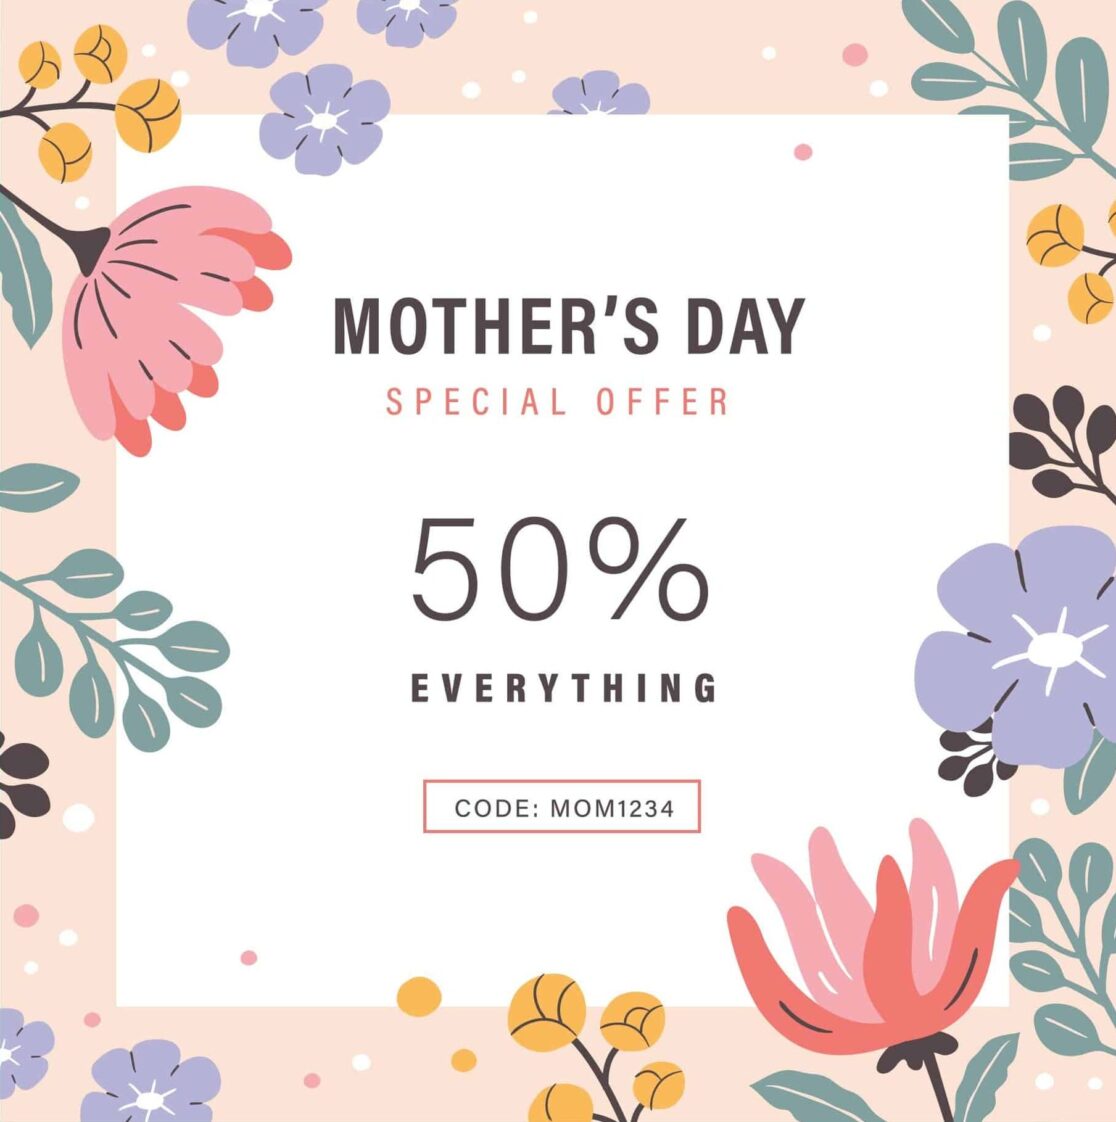 Sharing your Mother's Day sales promotions